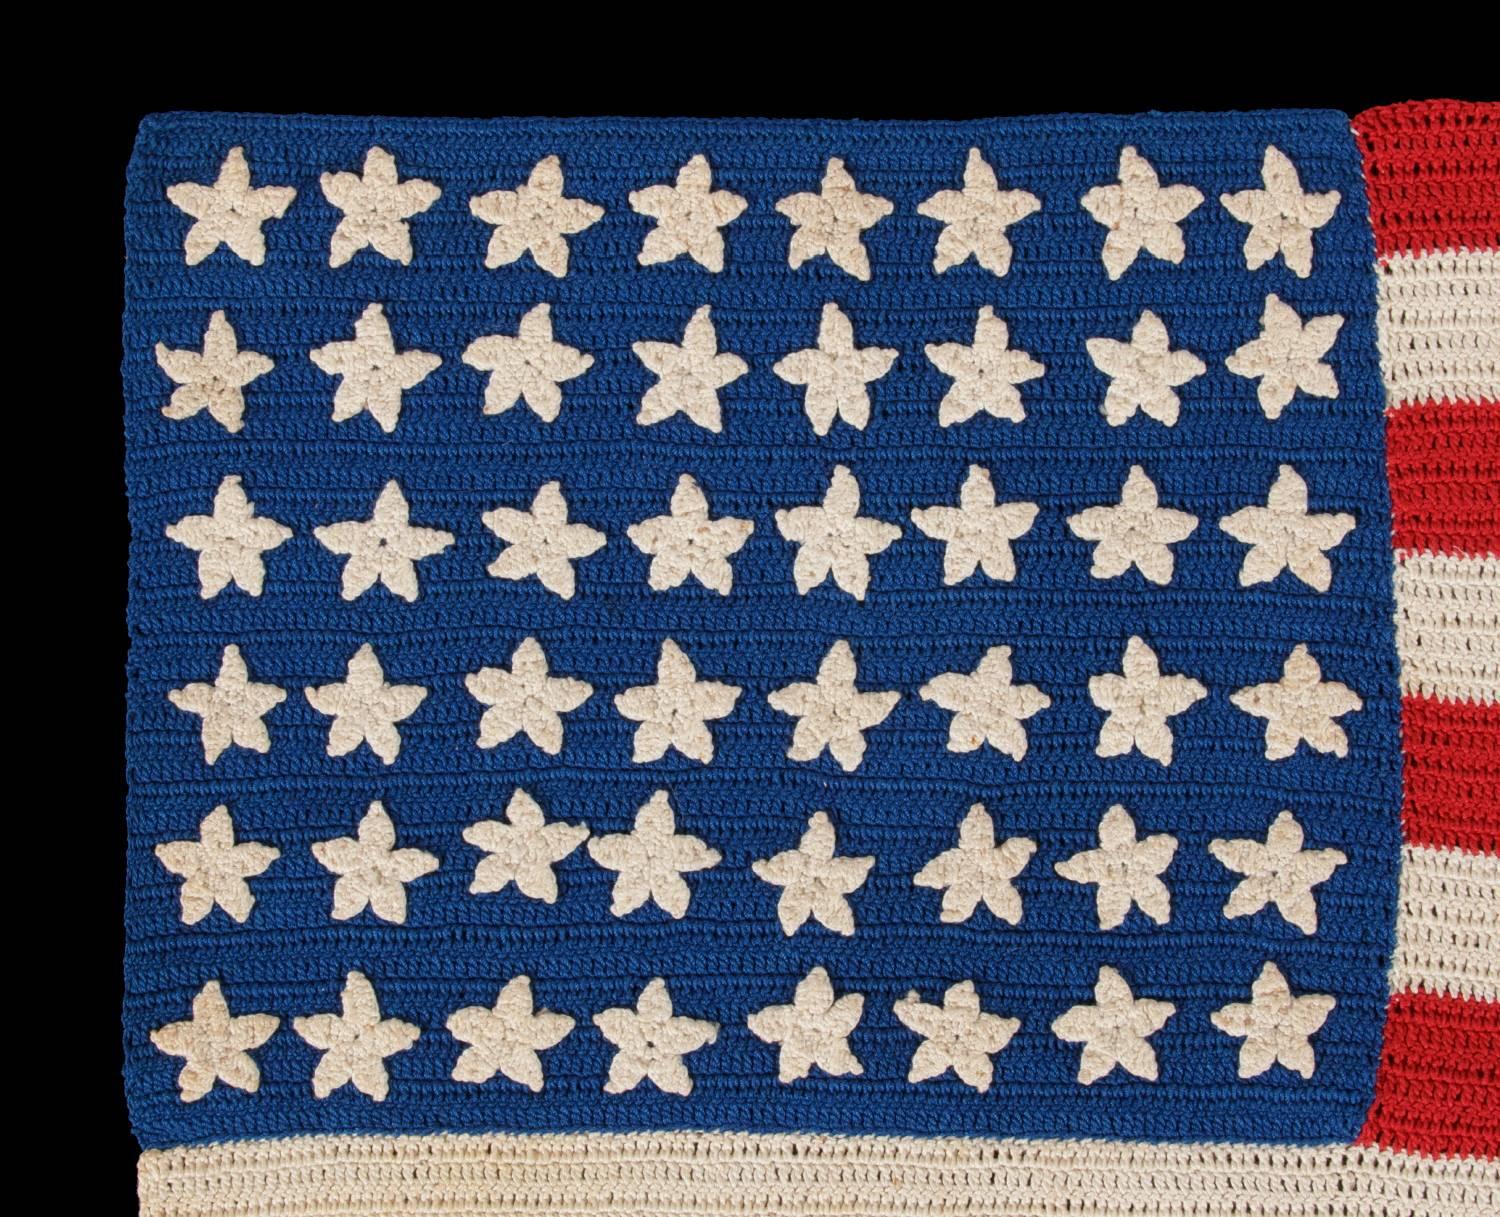 American 48 Stars, Crocheted, a Beautiful Example